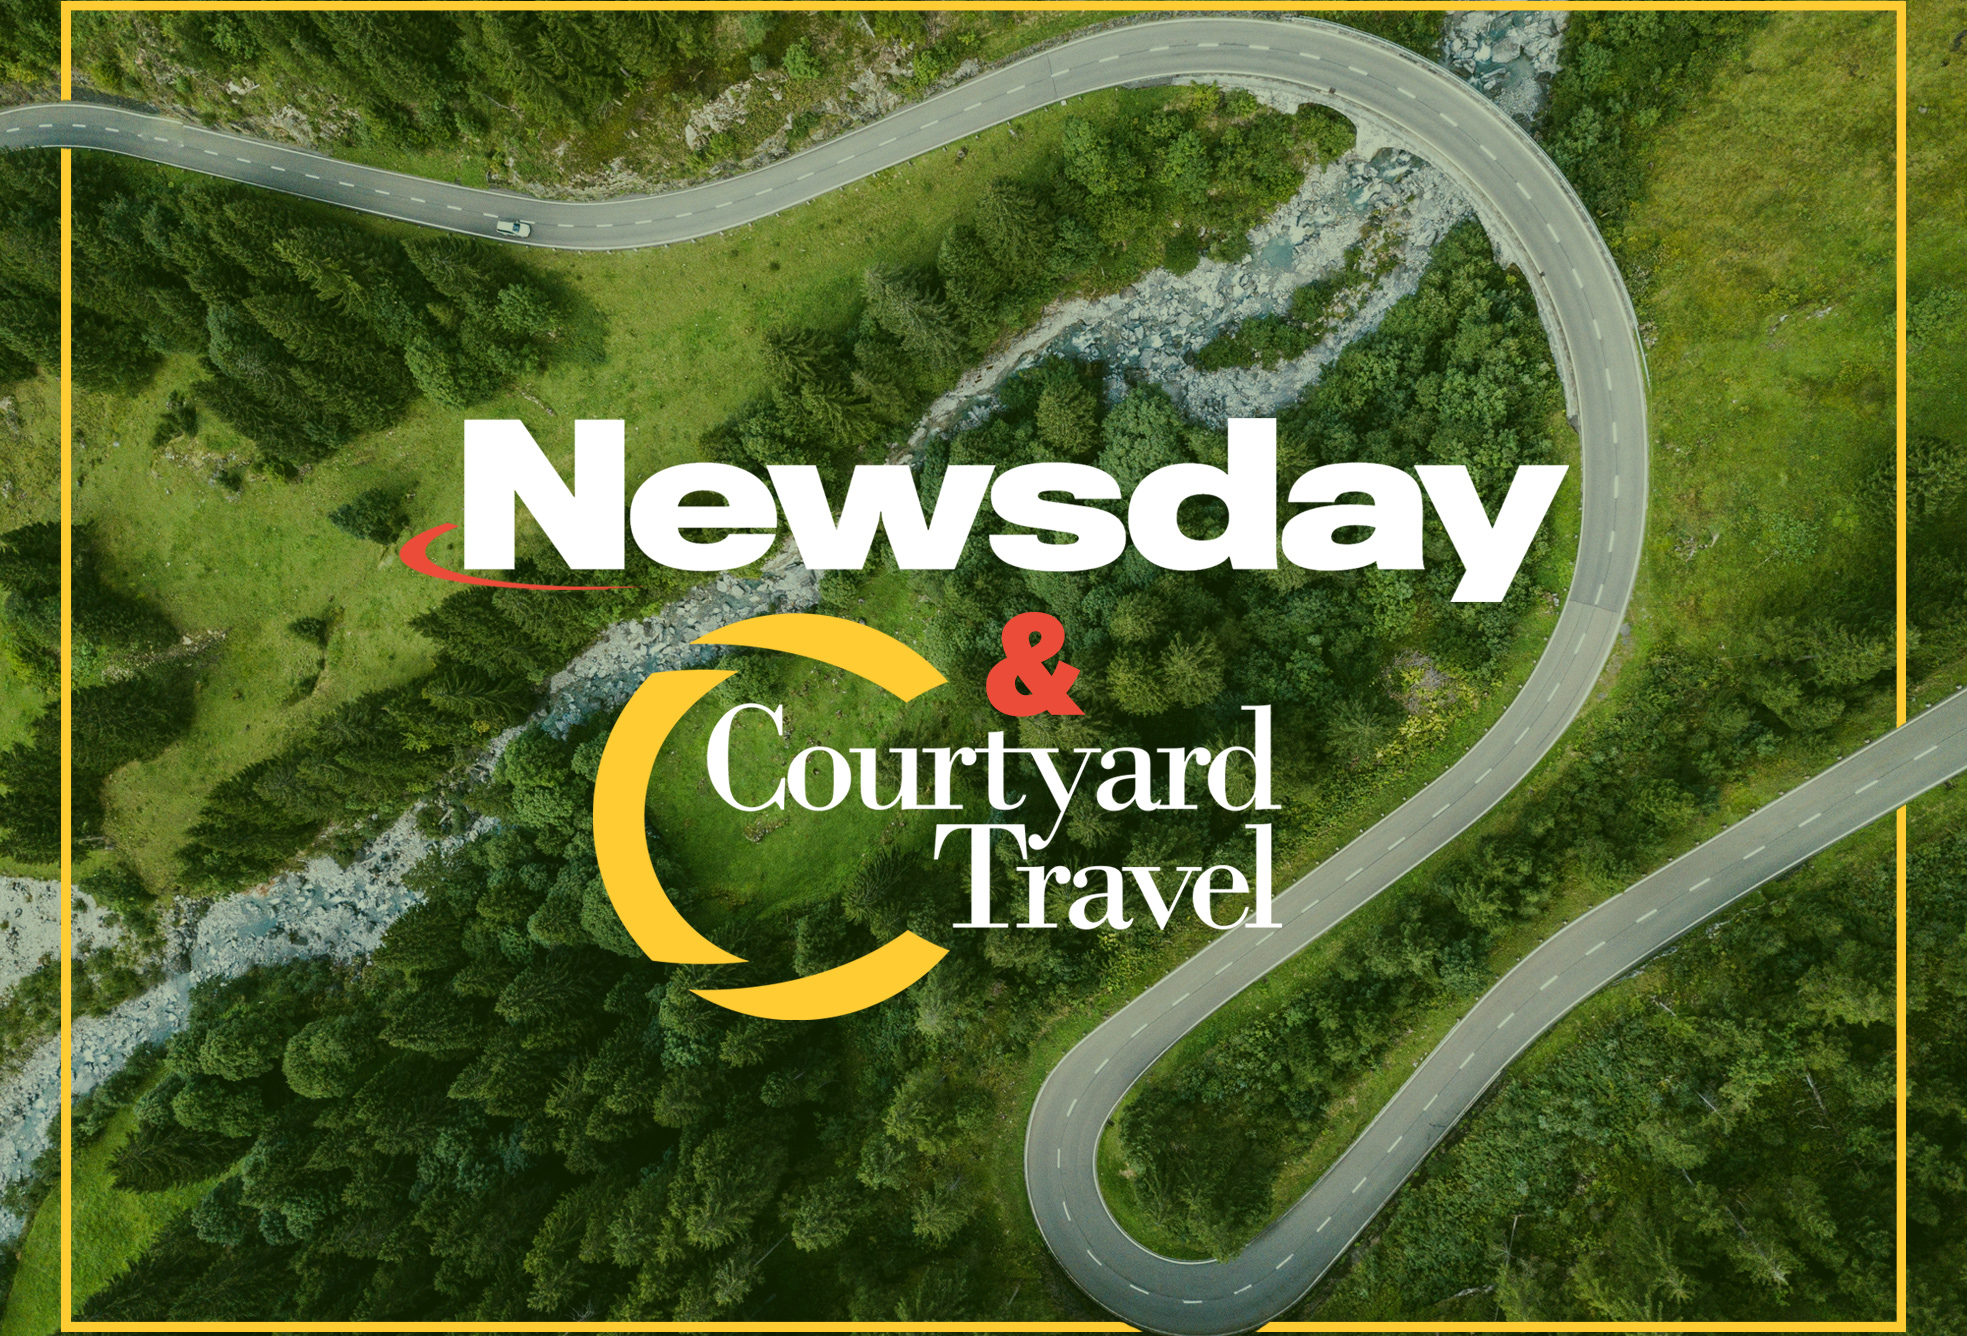 Newsday & Courtyard Travel, "The Golden Years"